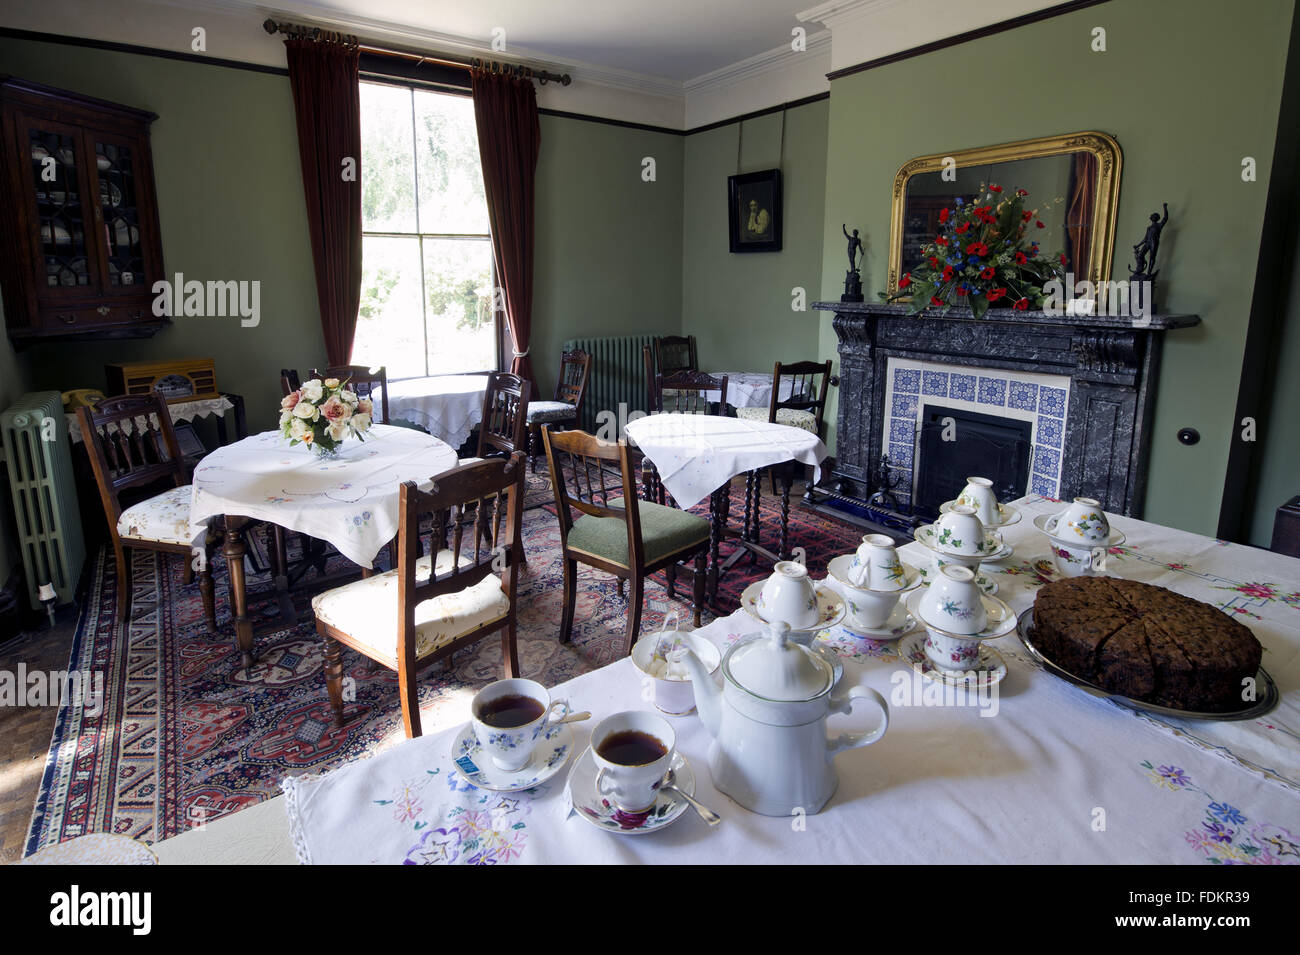 The Dining Room at Sunnycroft, Shropshire. Stock Photo